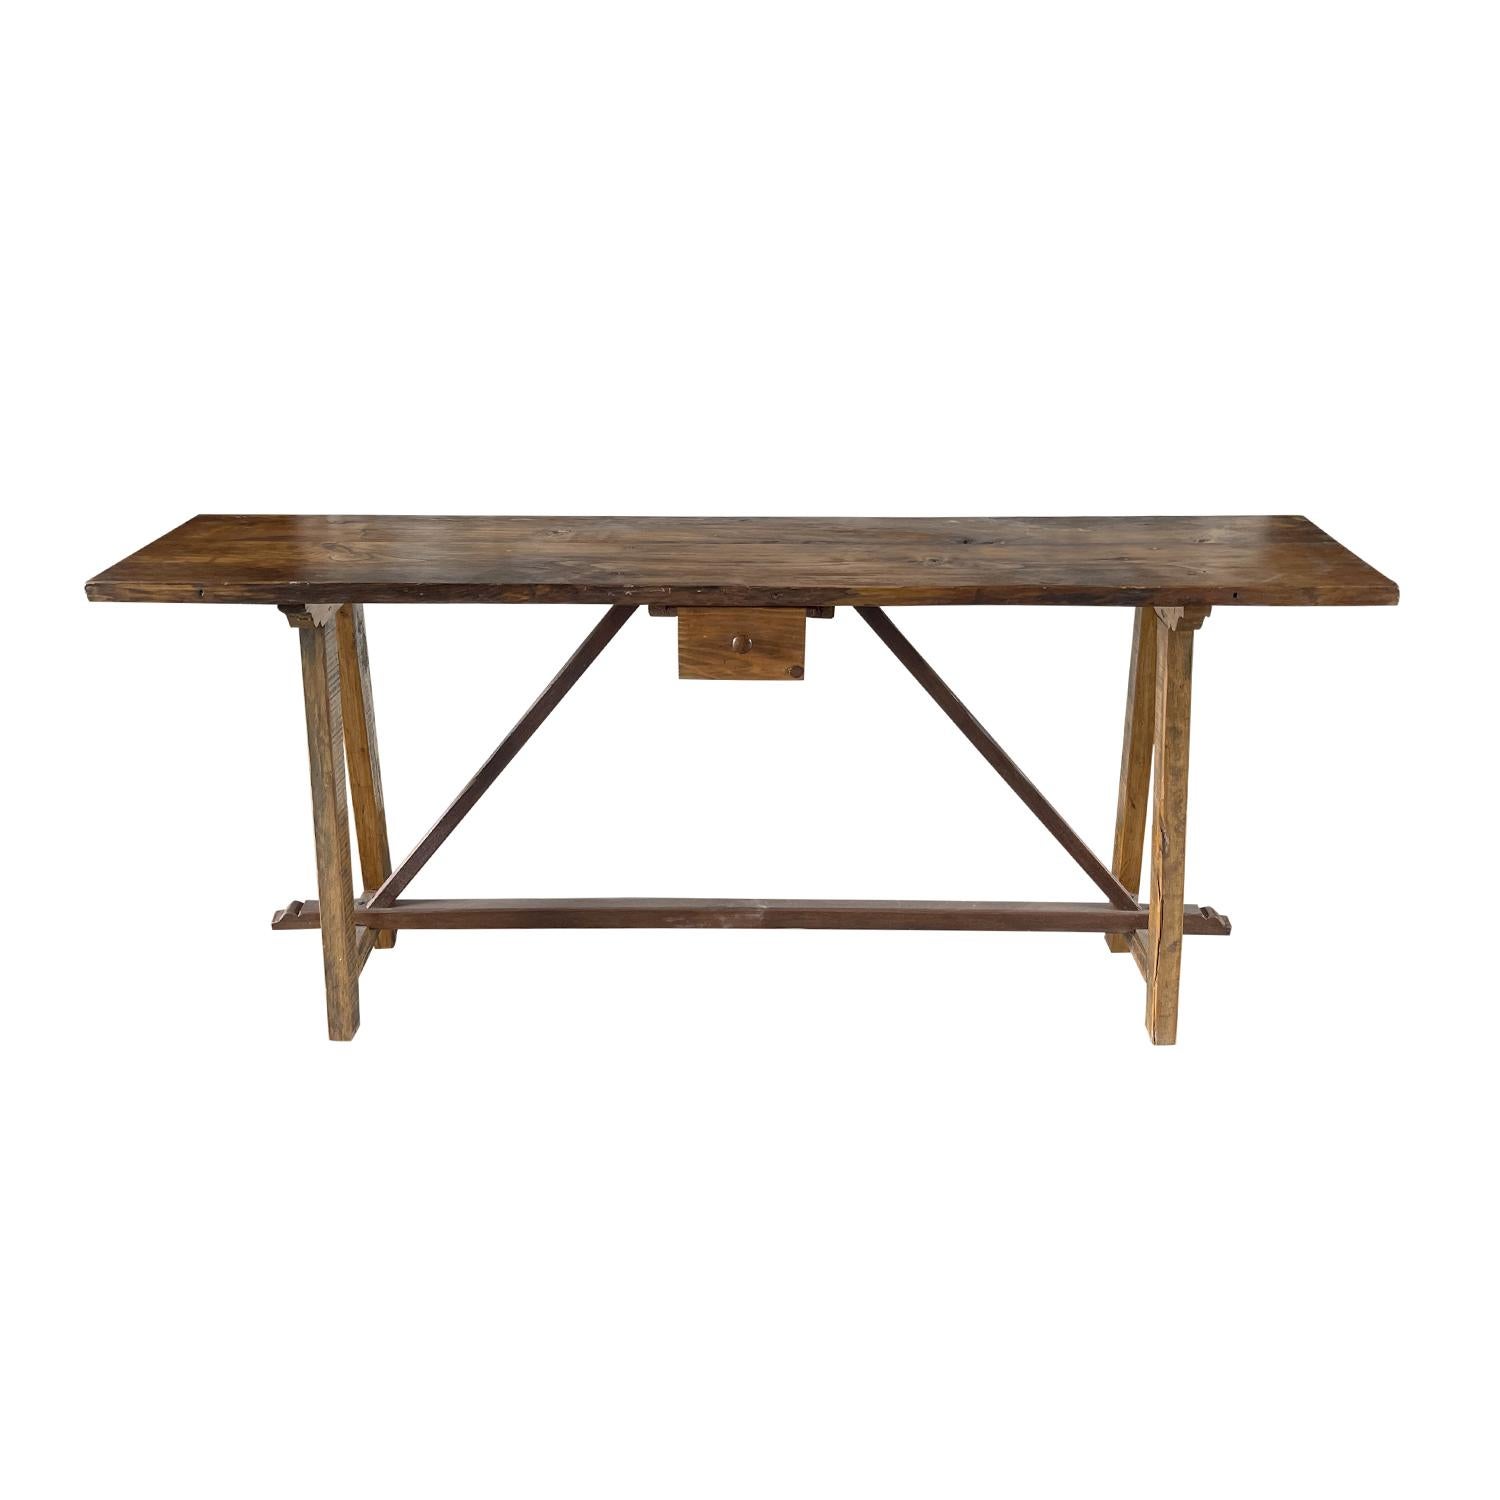 19th Century 18th Century Italian Antique Freestanding Walnut Console Table, Tuscan End Table